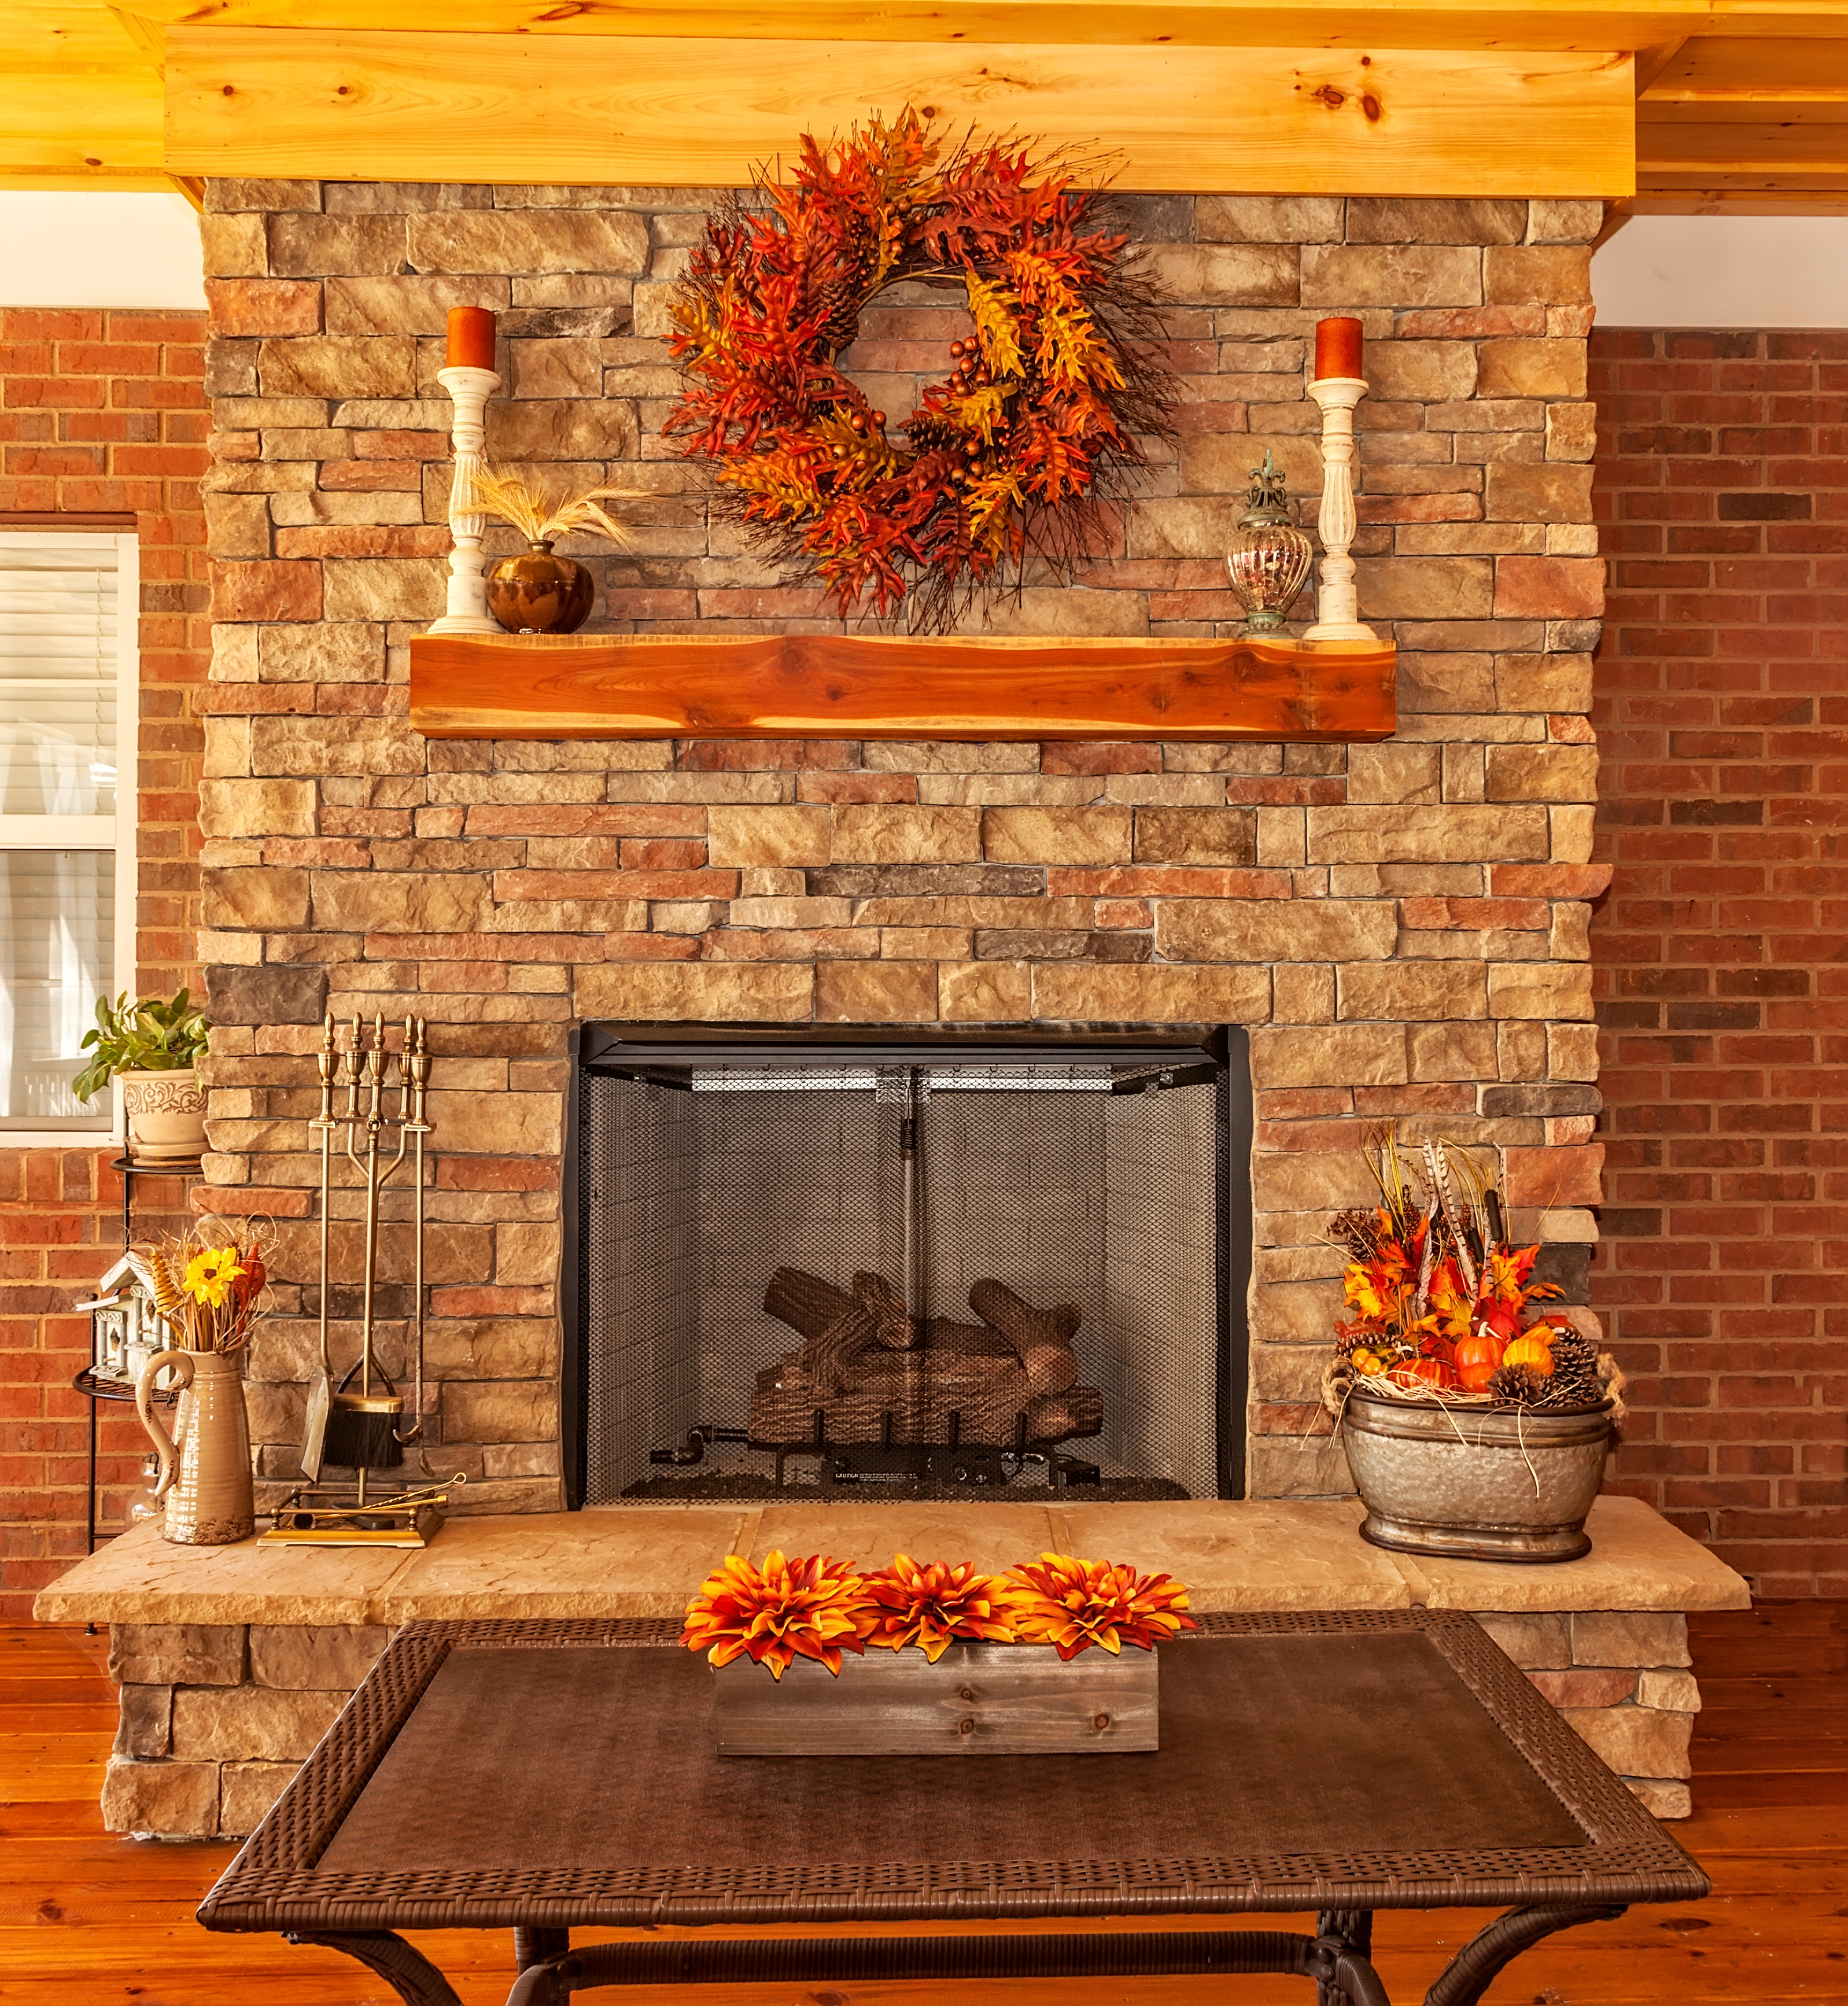 5 Fall Mantel Decorating Ideas That'll Make You Look Like a Pro 21